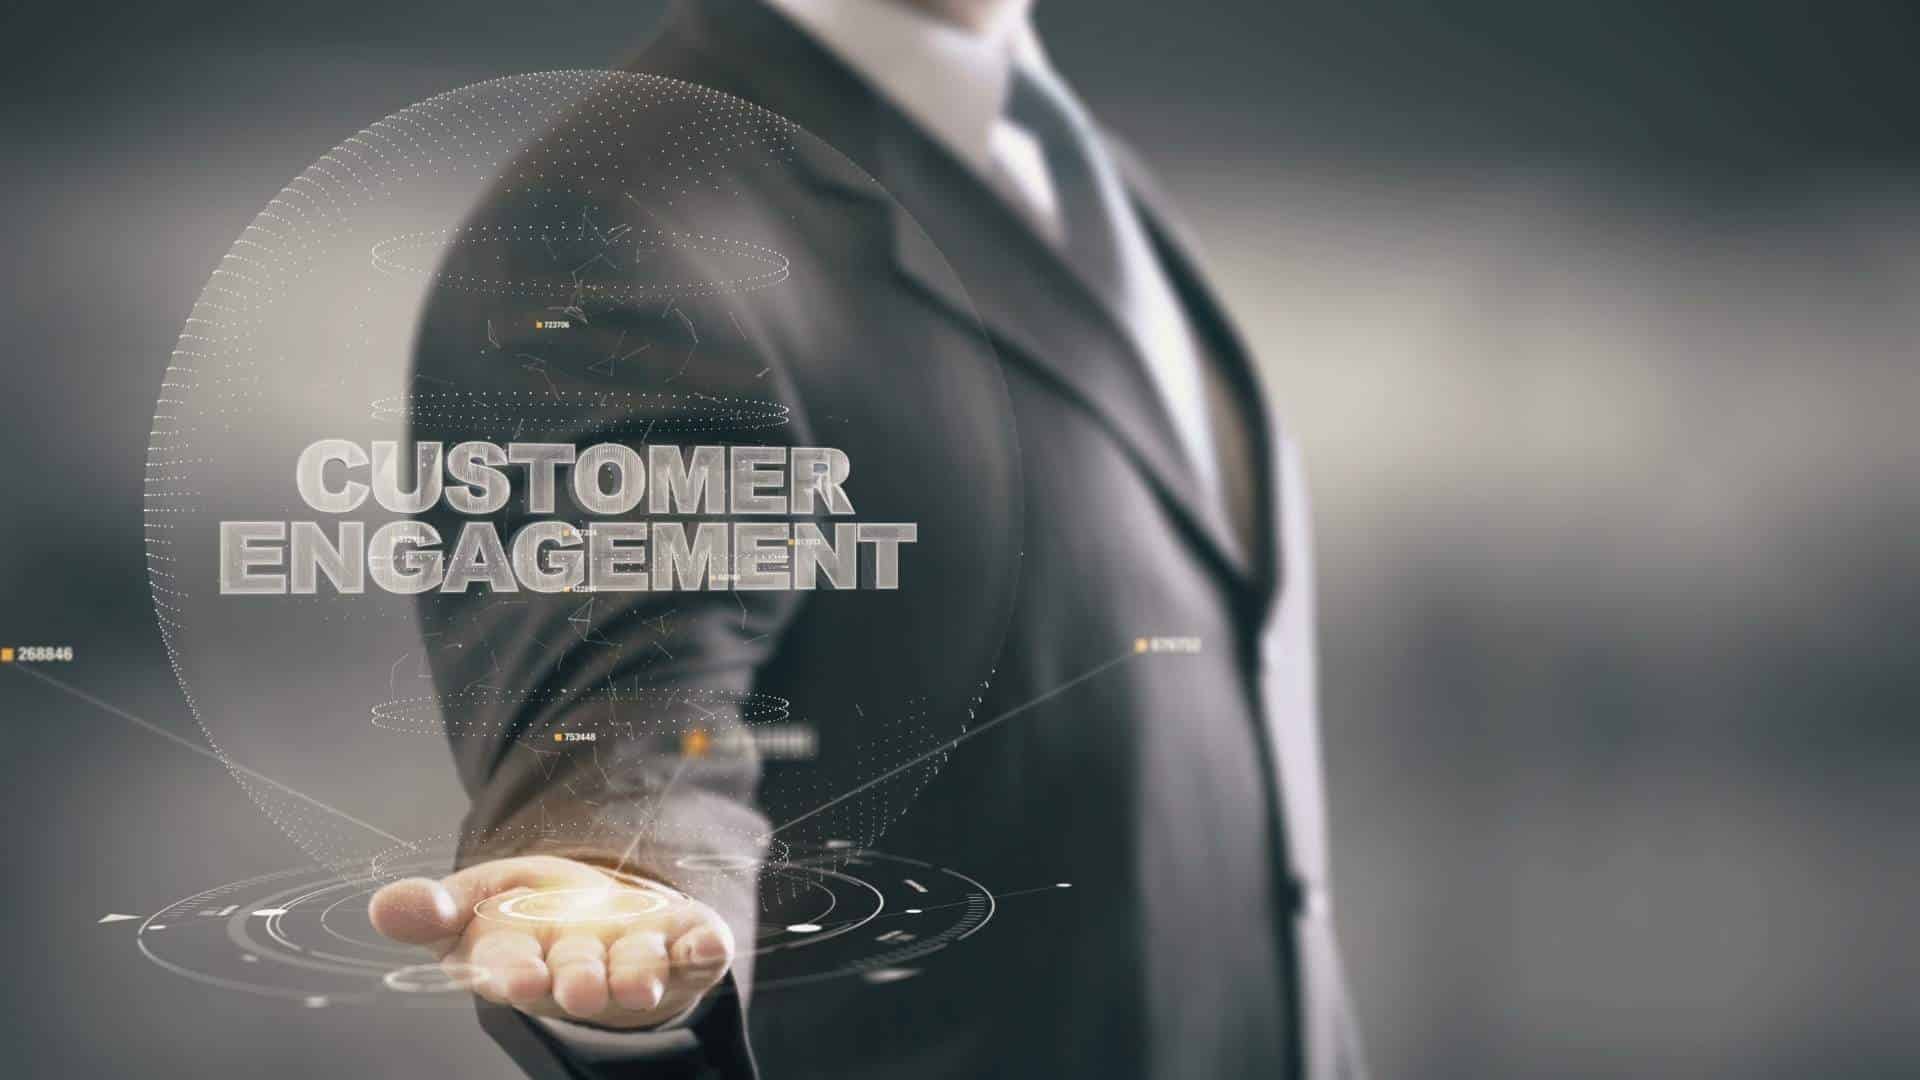 Customer Engagement Initiatives are essential